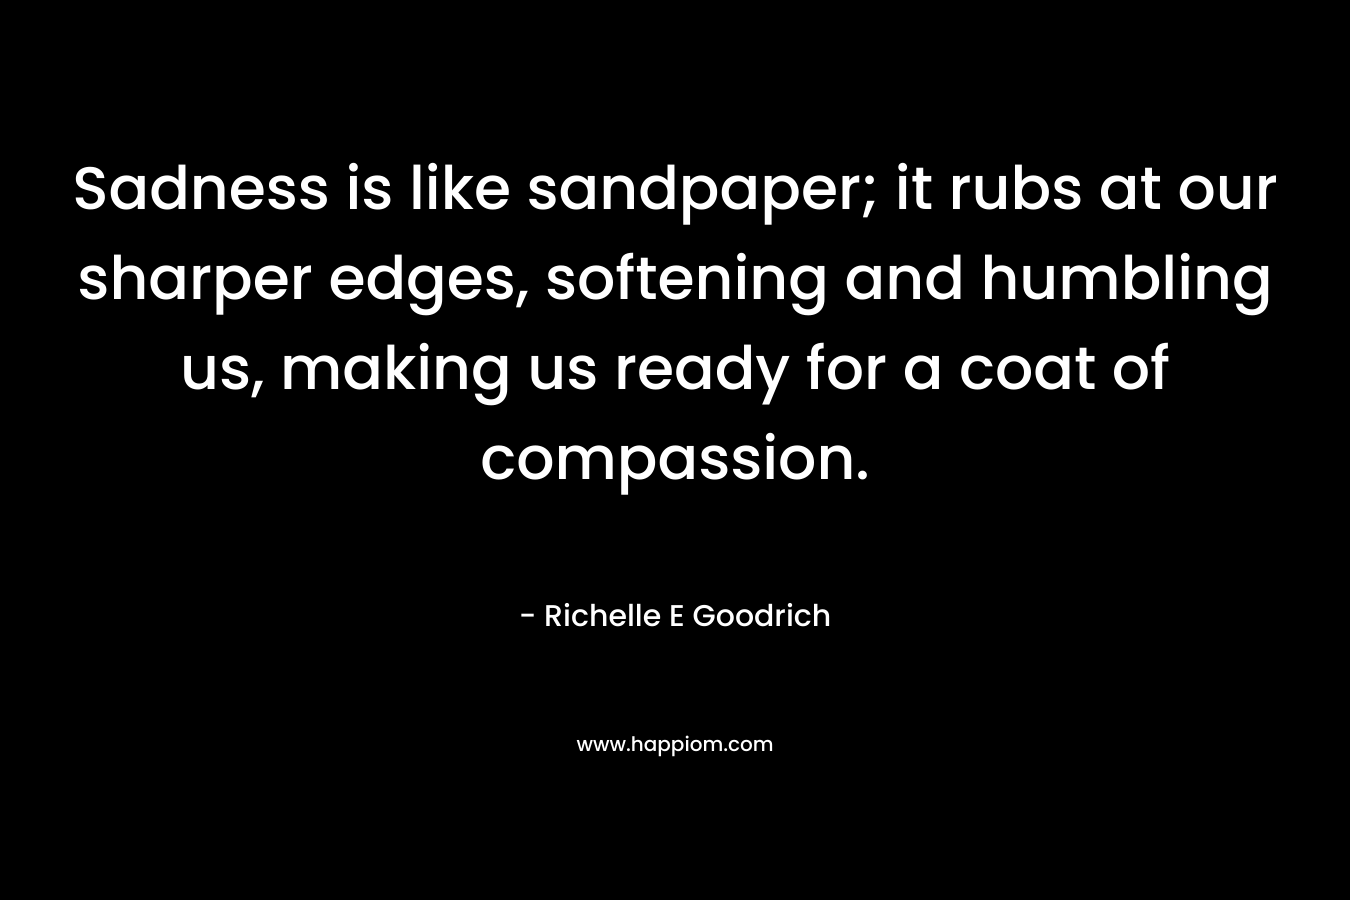 Sadness is like sandpaper; it rubs at our sharper edges, softening and humbling us, making us ready for a coat of compassion. – Richelle E Goodrich